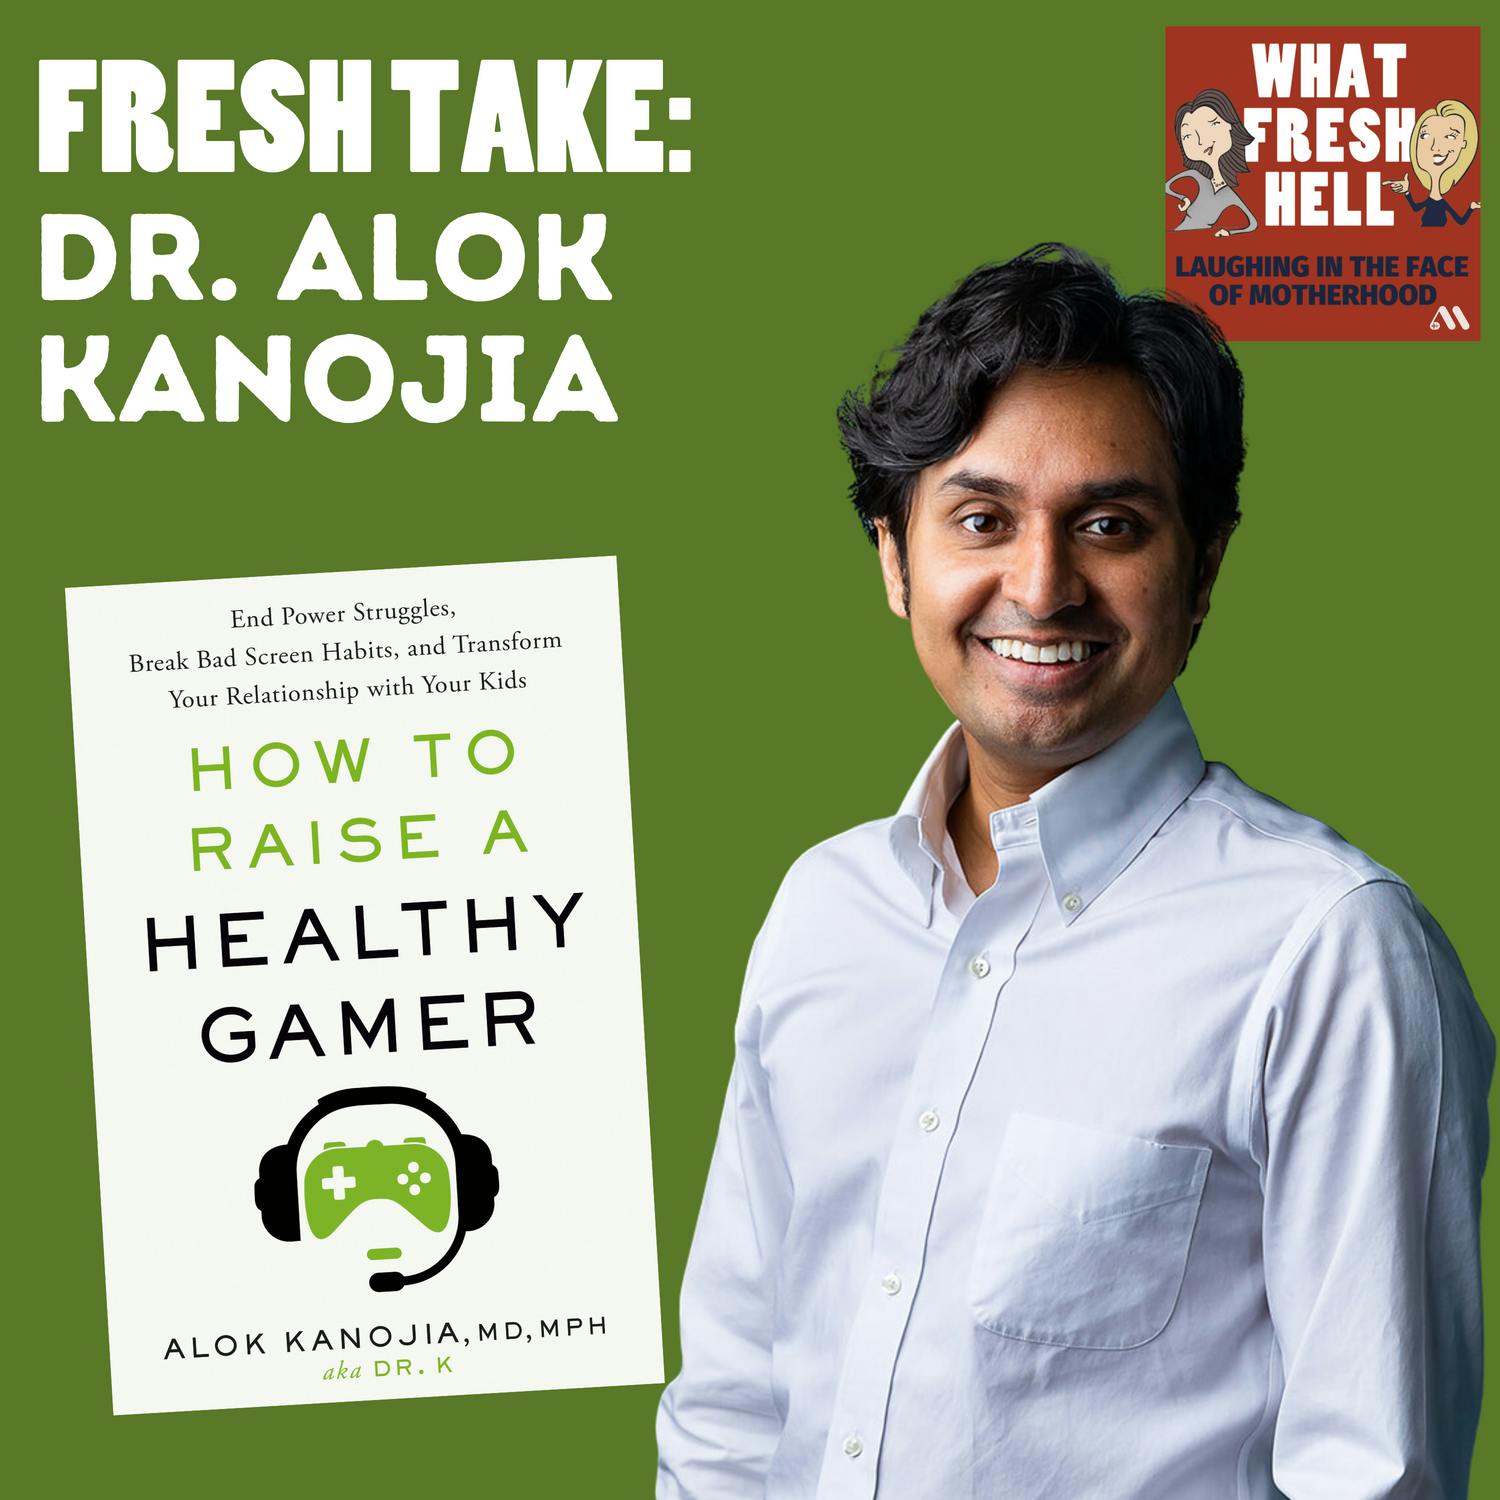 Fresh Take: Dr. Alok Kanojia on Parenting a Healthy Gamer